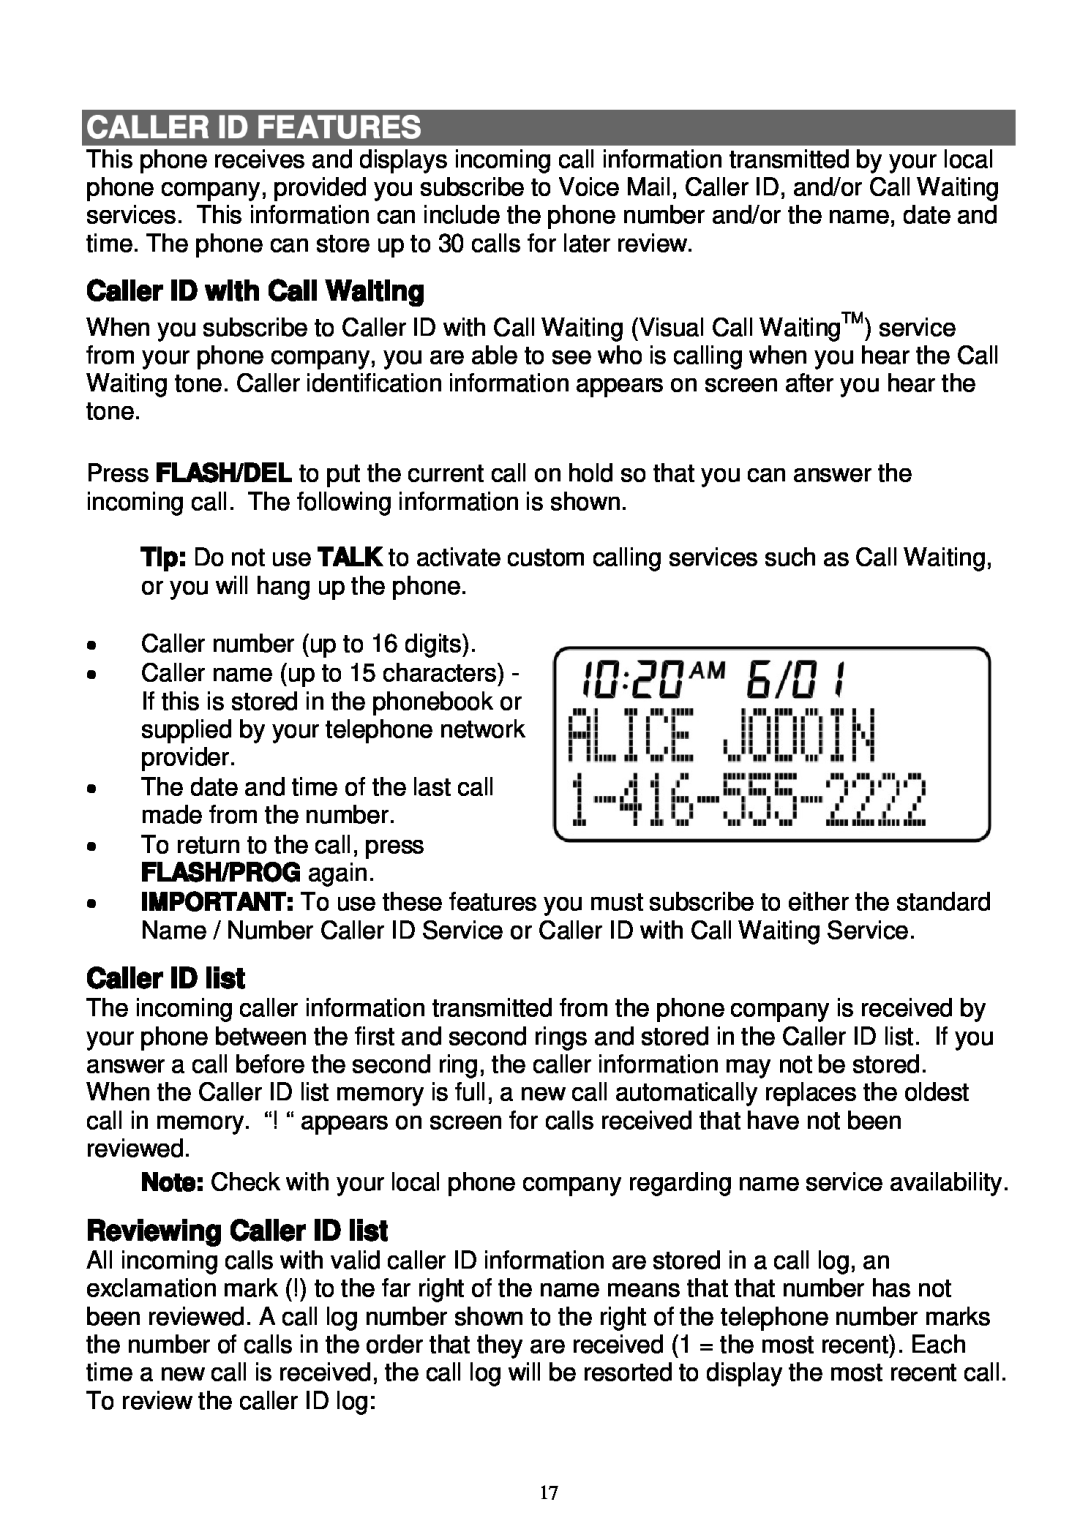 Sanyo LNS-W10 instruction manual Caller Id Features, Caller ID with Call Waiting, Reviewing Caller ID list 